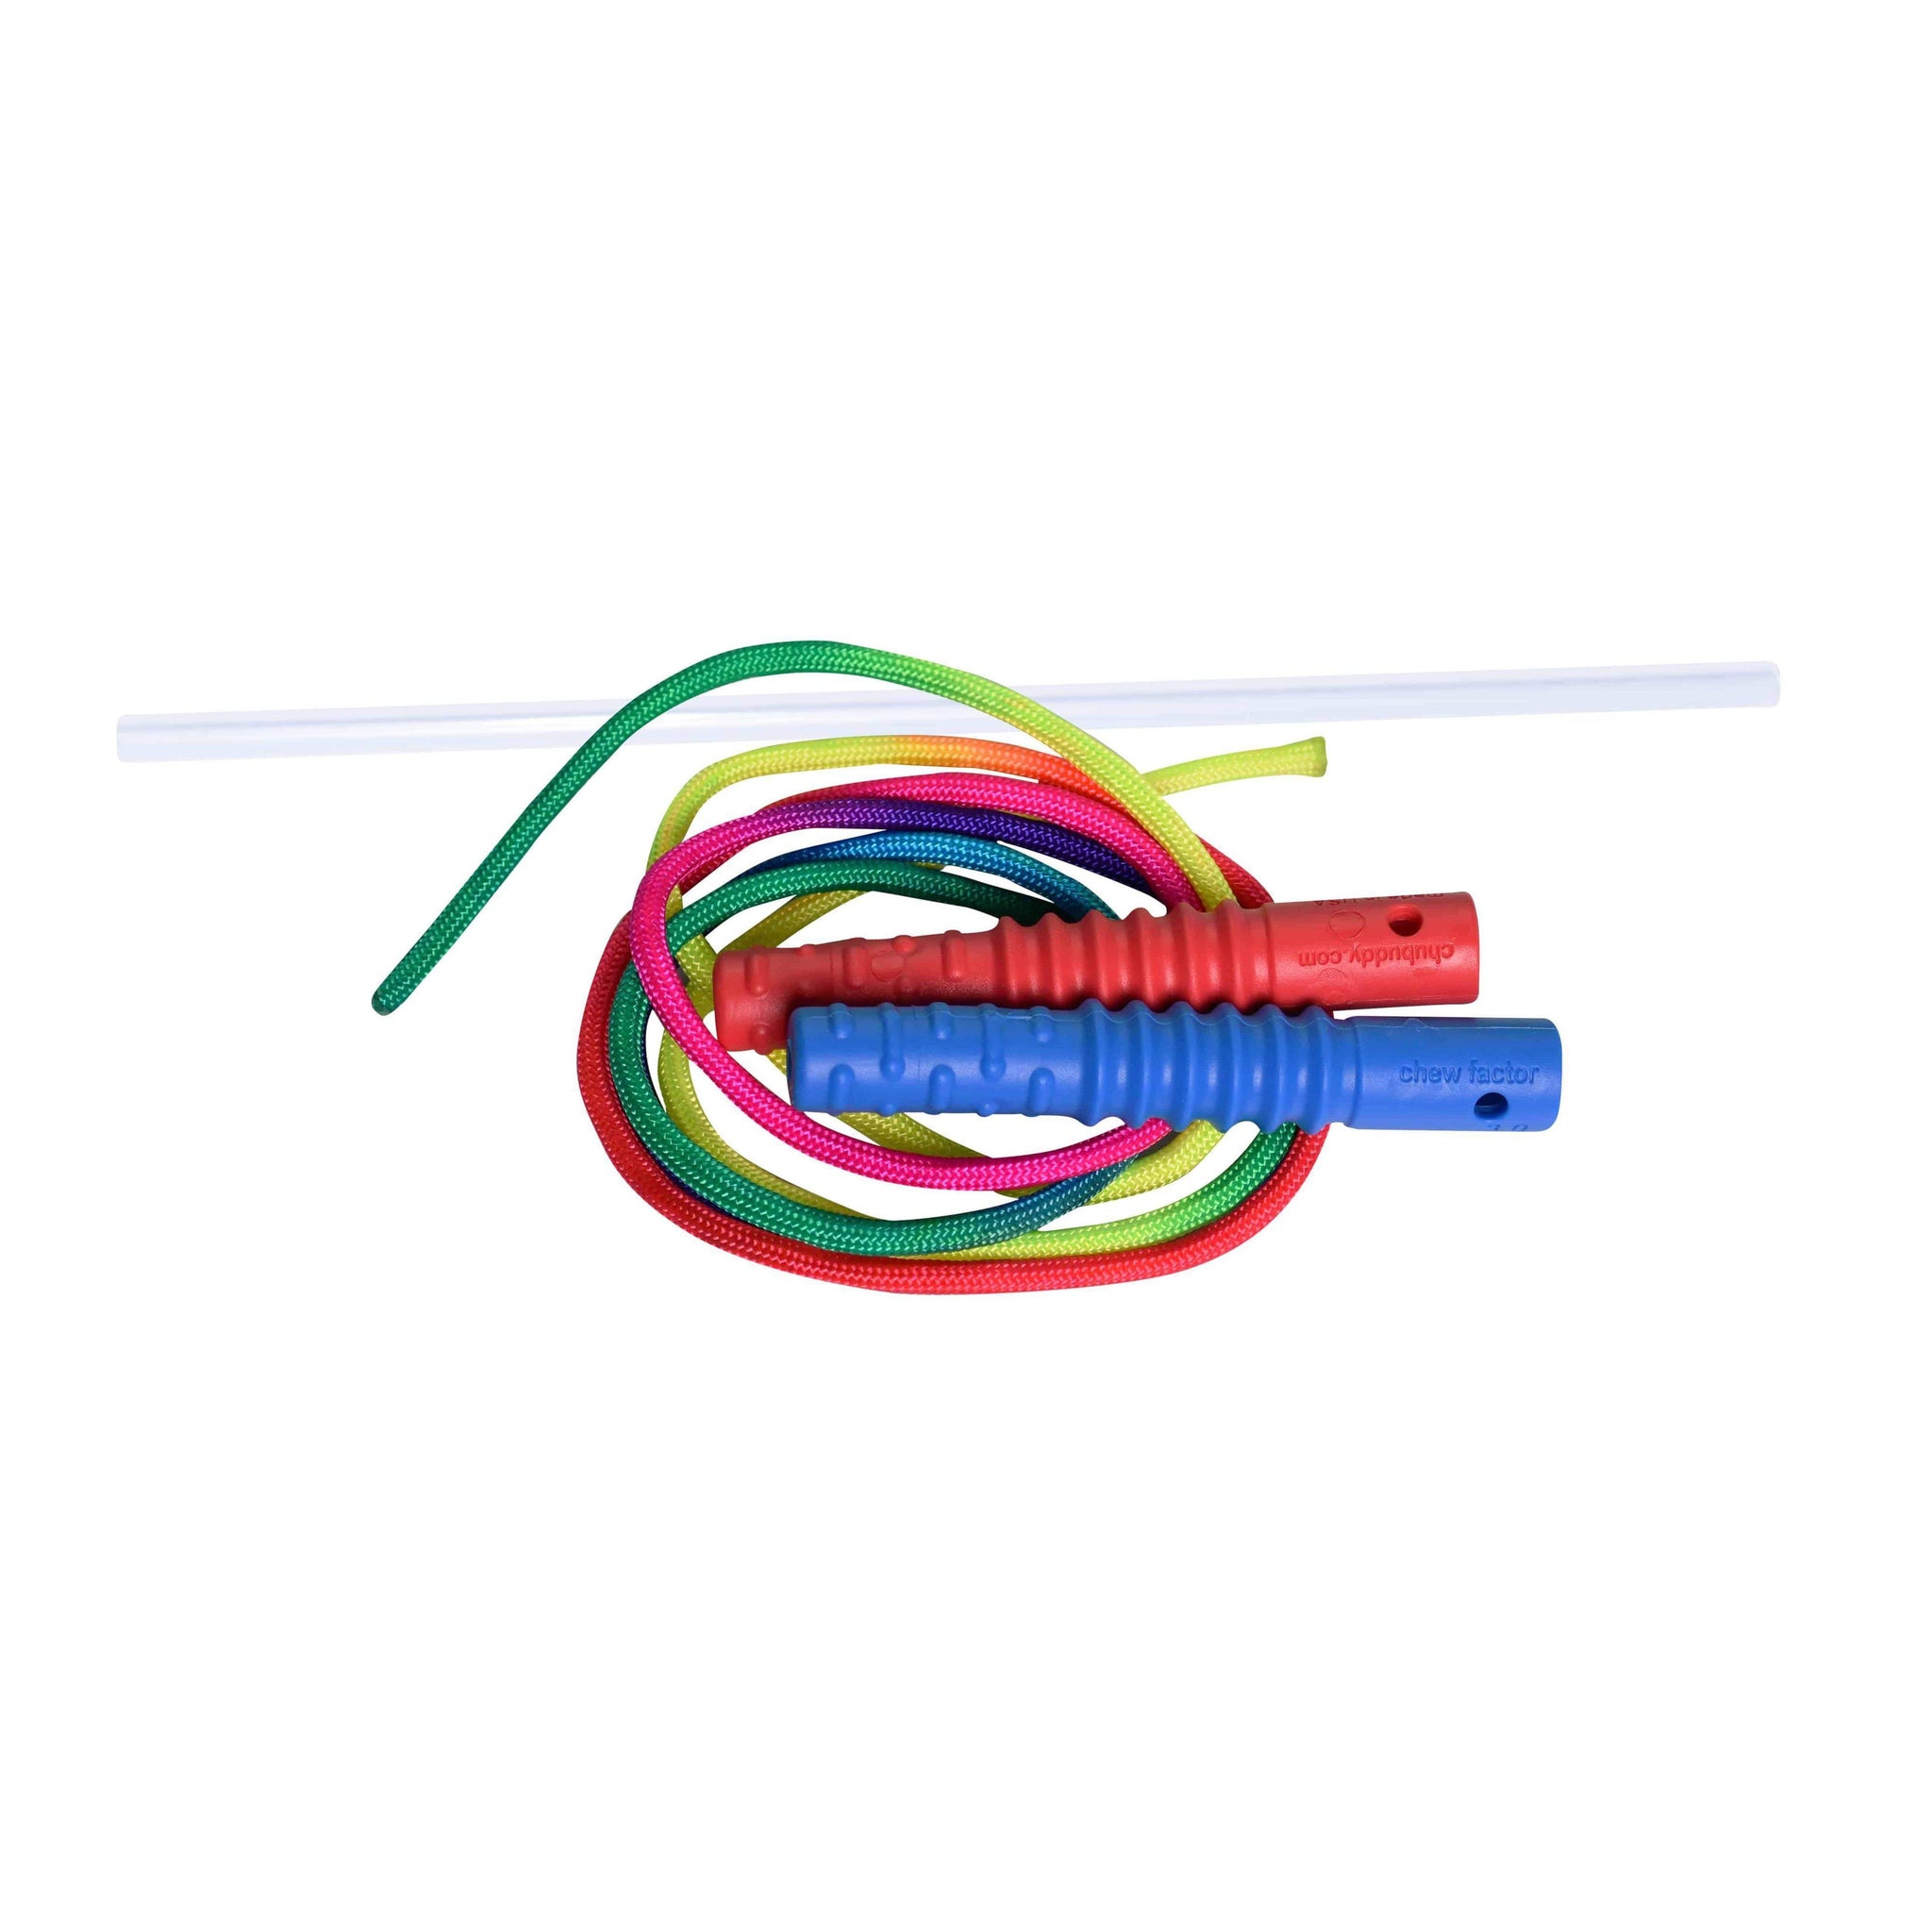 ChuBuddy Blue Cord Zilla with Rainbow Cord and Install Pack